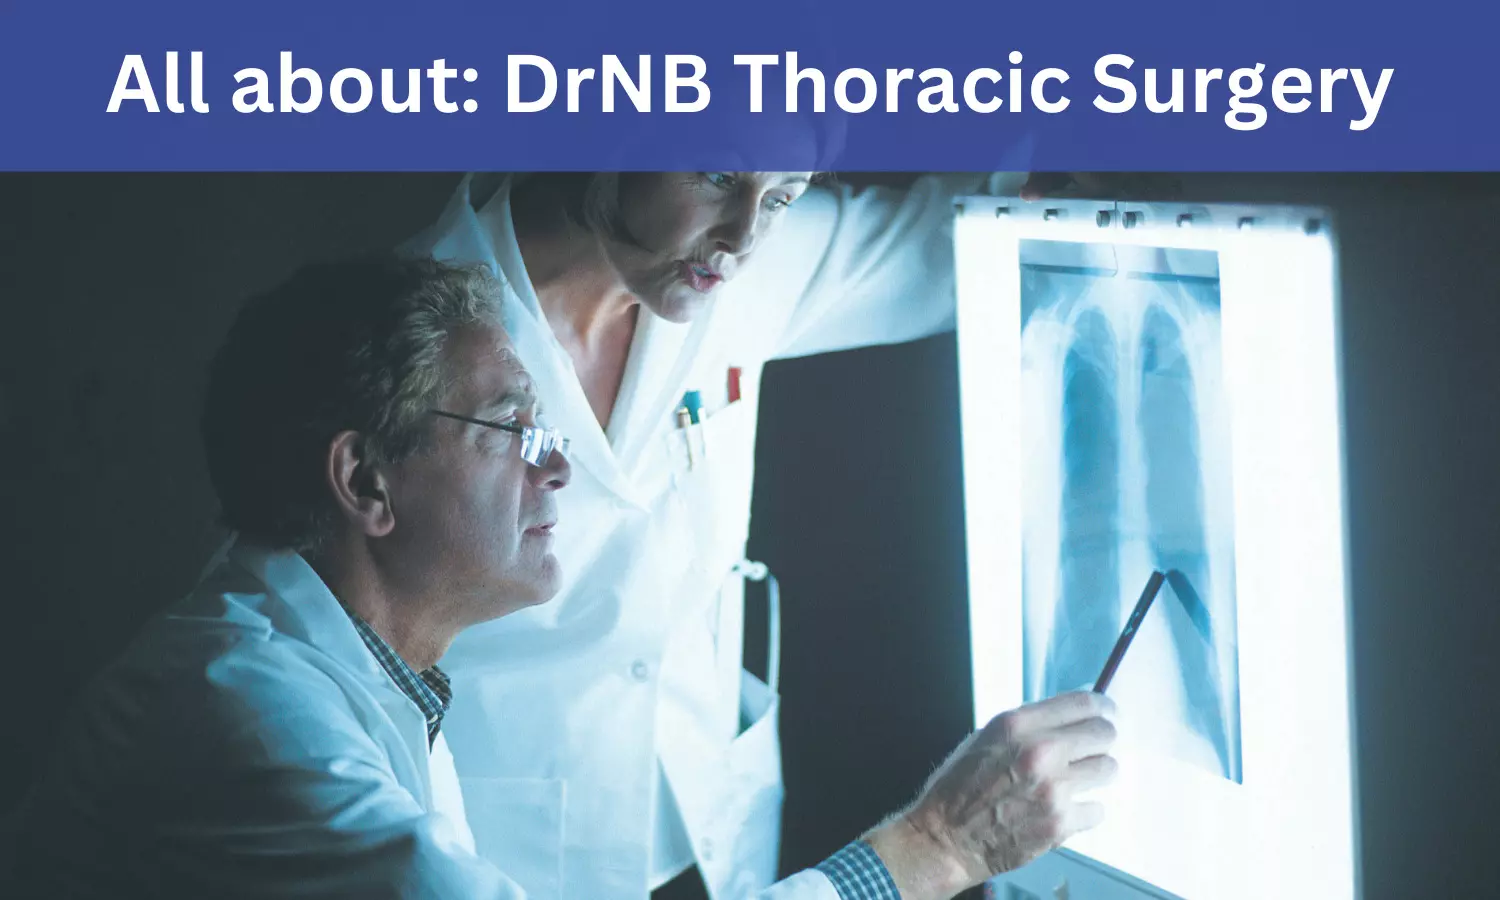 DrNB Thoracic Surgery: Admissions, Medical Colleges, Eligibility Criteria, fee details here